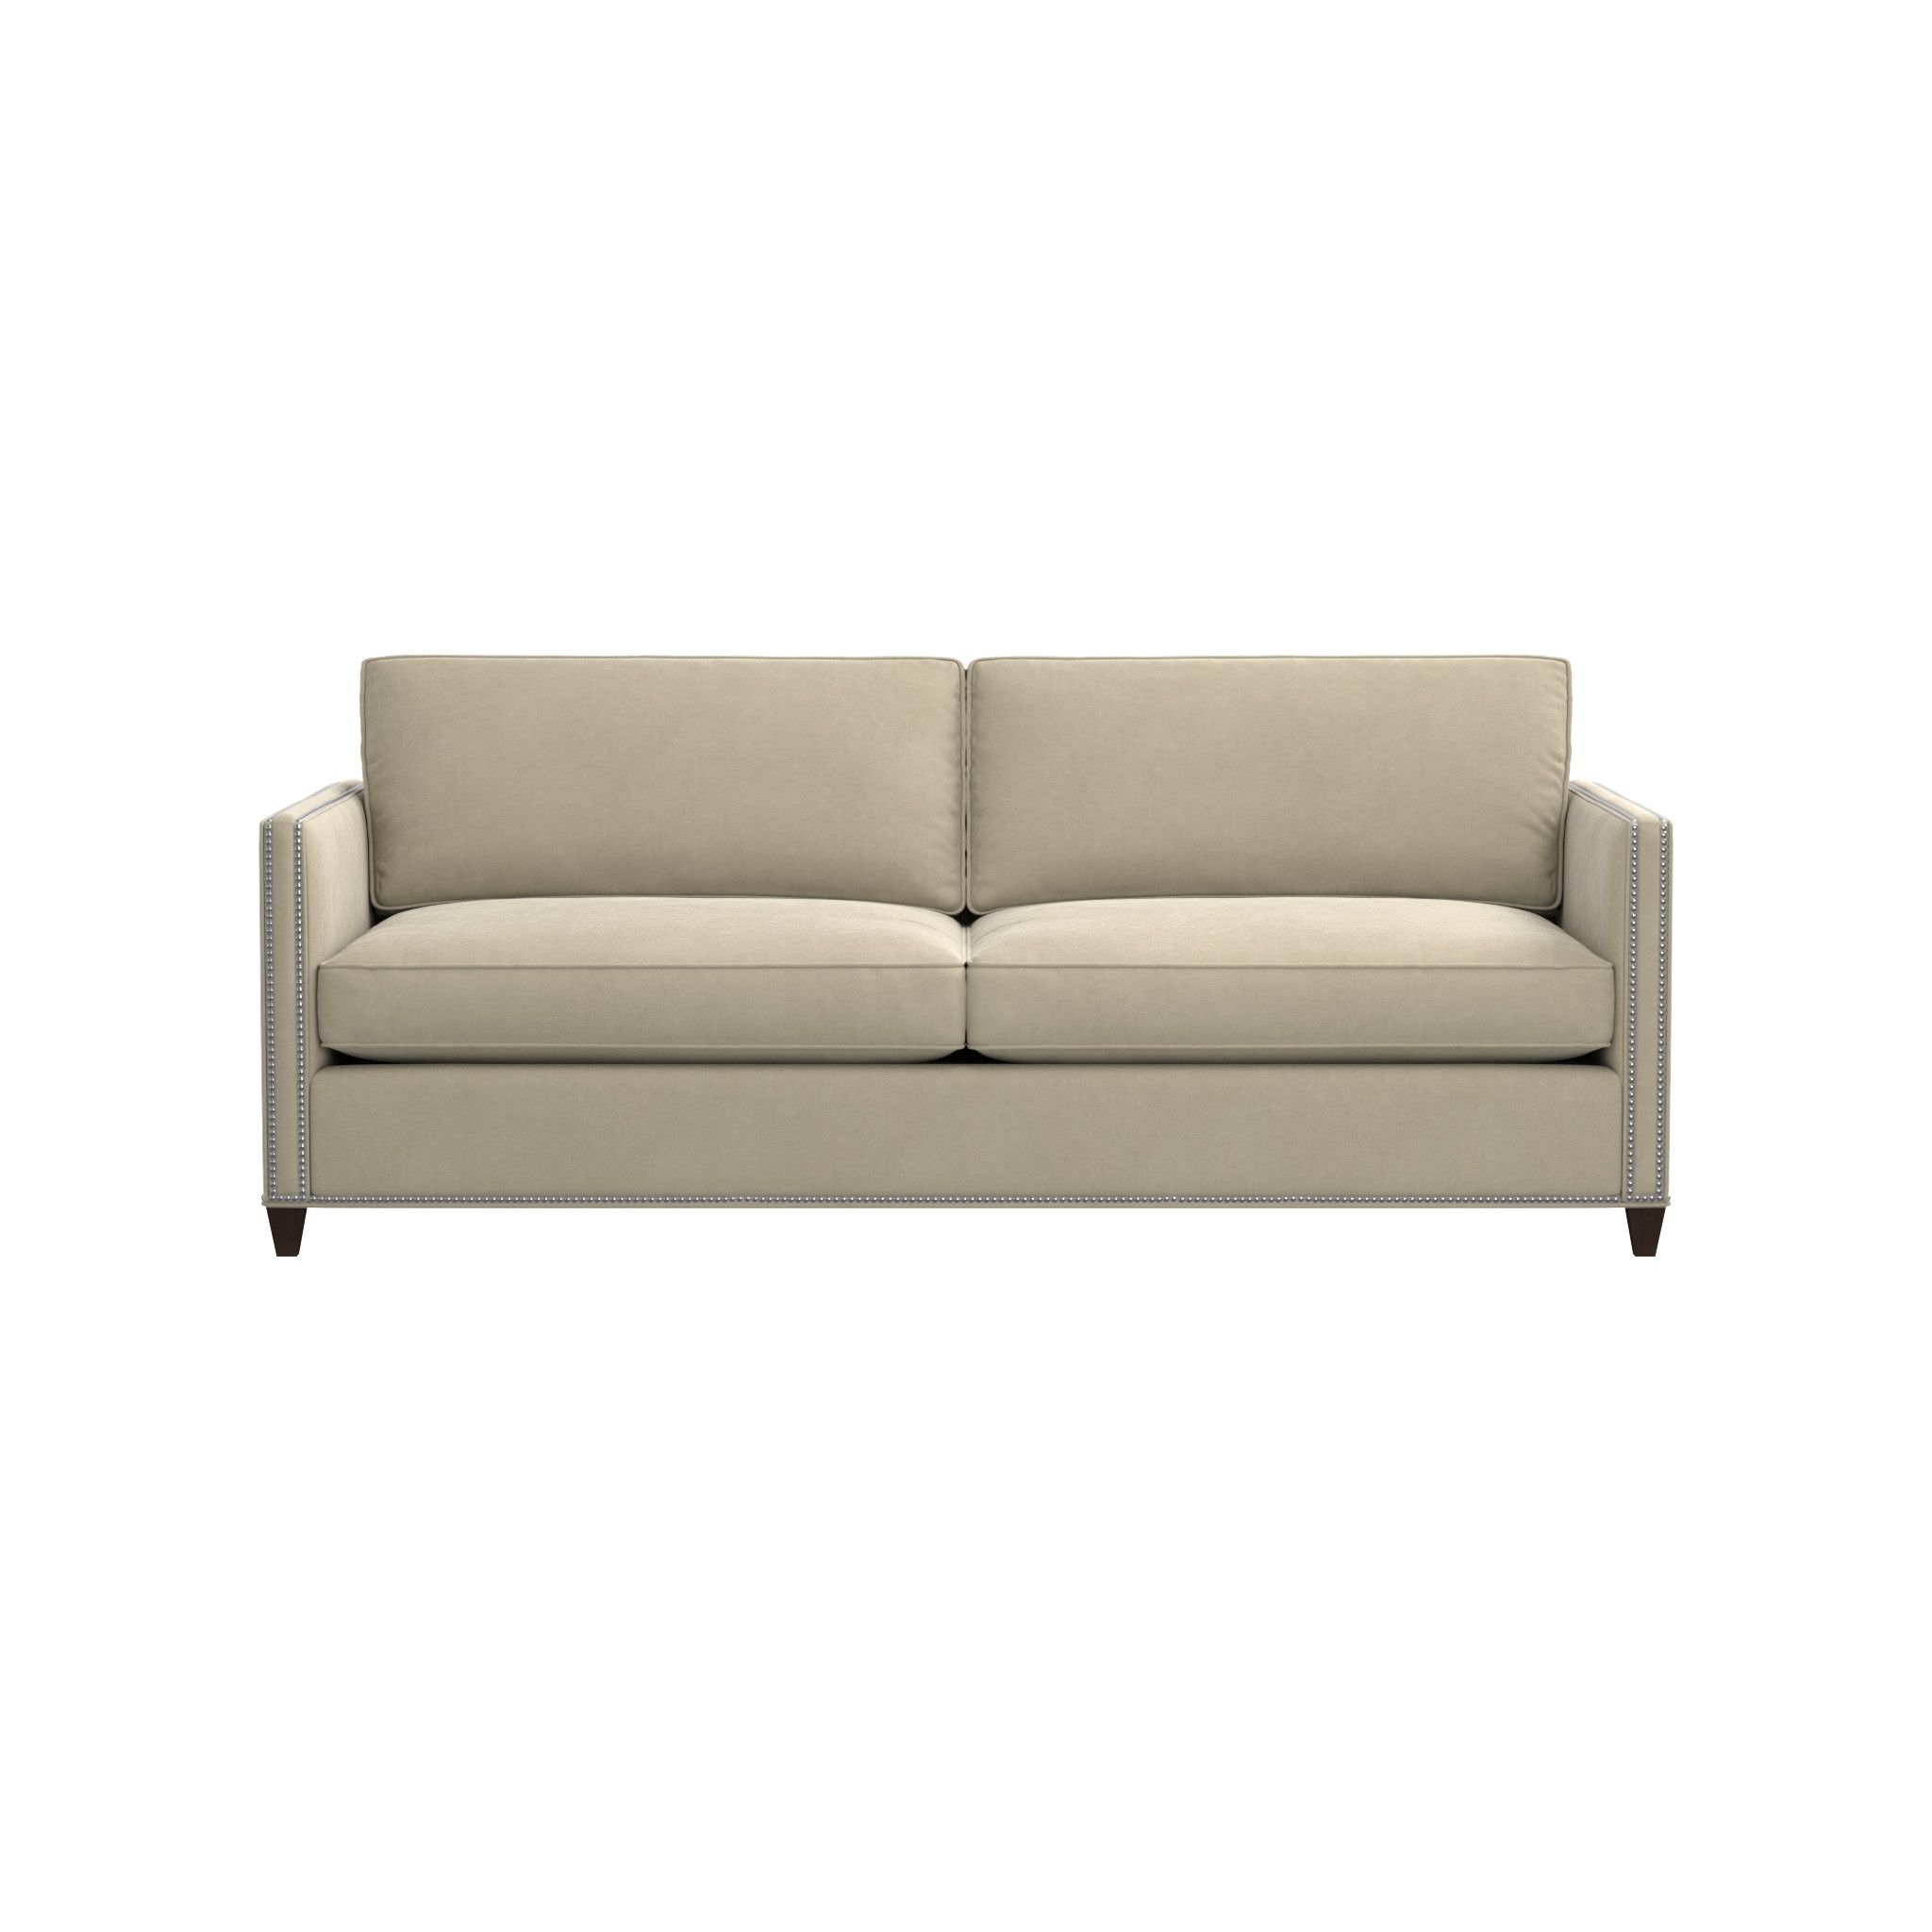 Dryden Queen Sleeper Sofa With Nailheads | Crate And Barrel Throughout Crate And Barrel Sofa Sleepers (View 1 of 20)